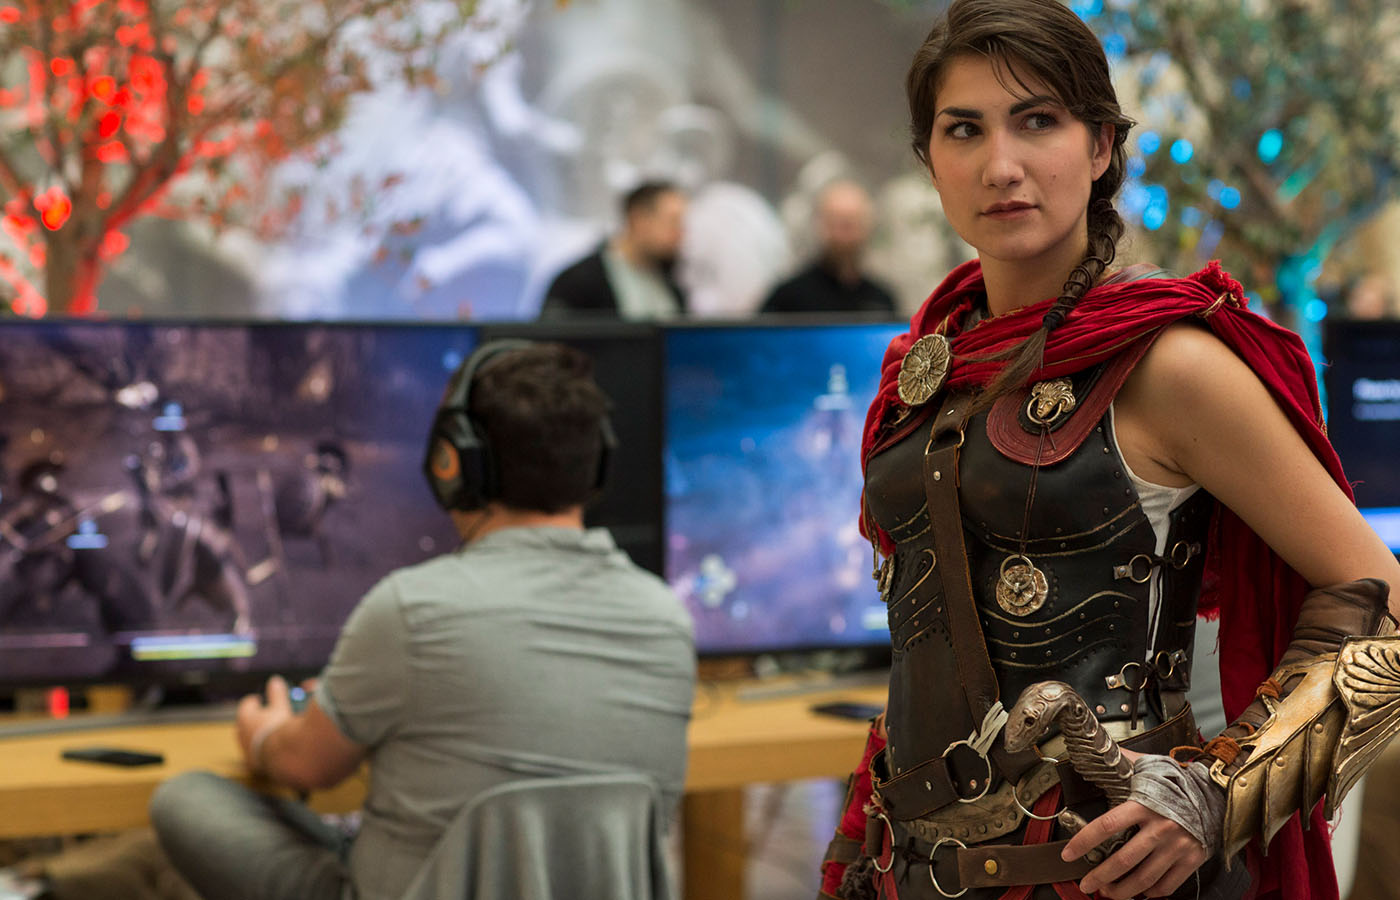 Ubisoft – 2018 PR Event for “Assassin’s Creed Odyssey”